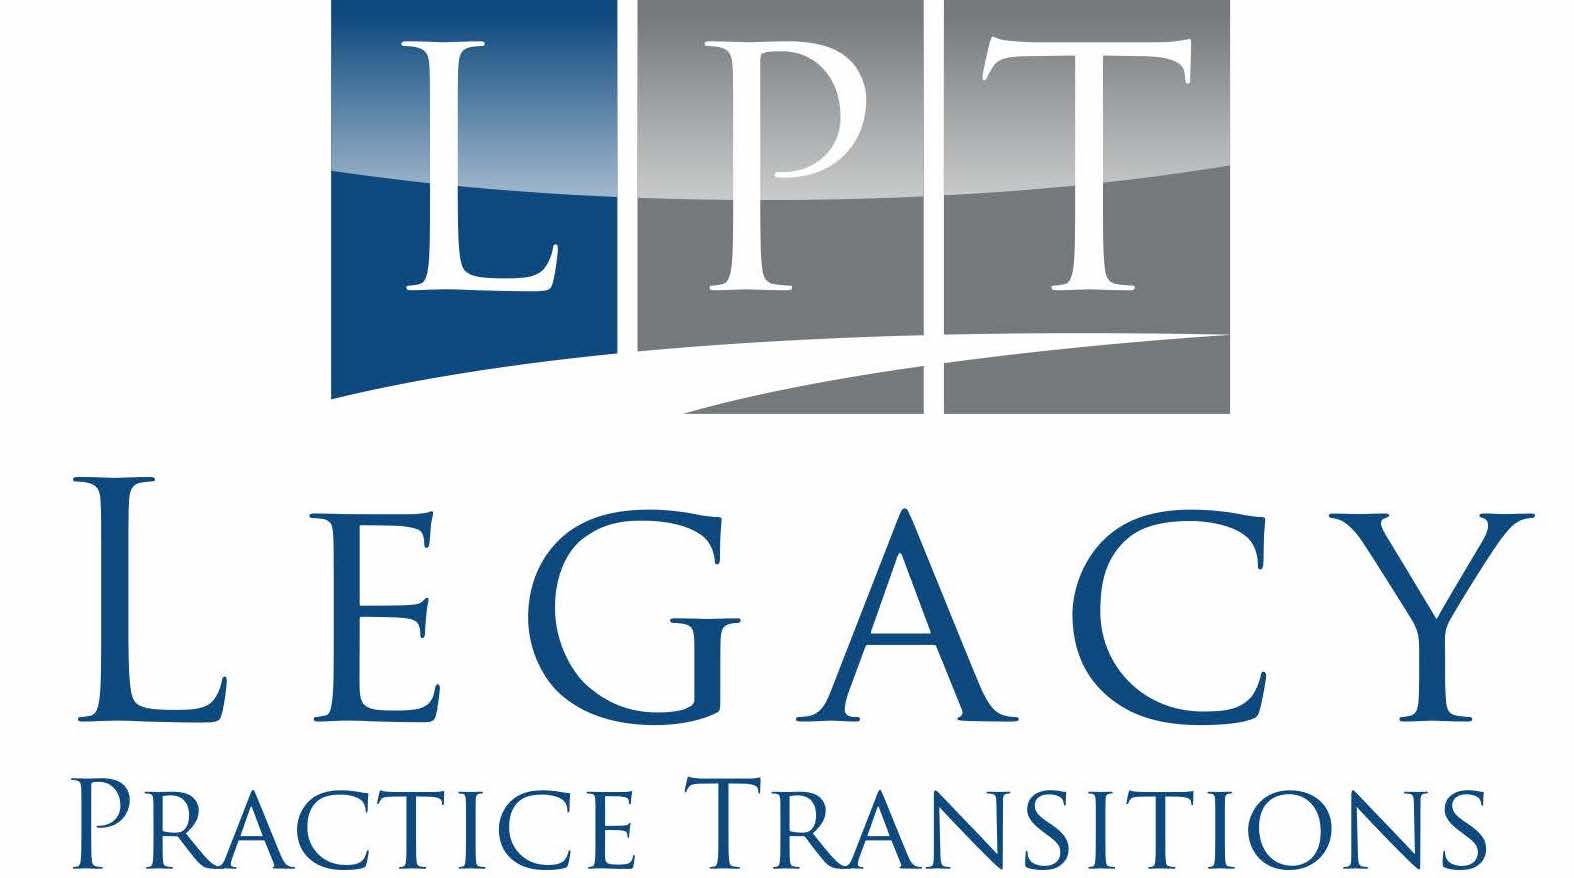 Legacy Practice Transitions Inc. Logo